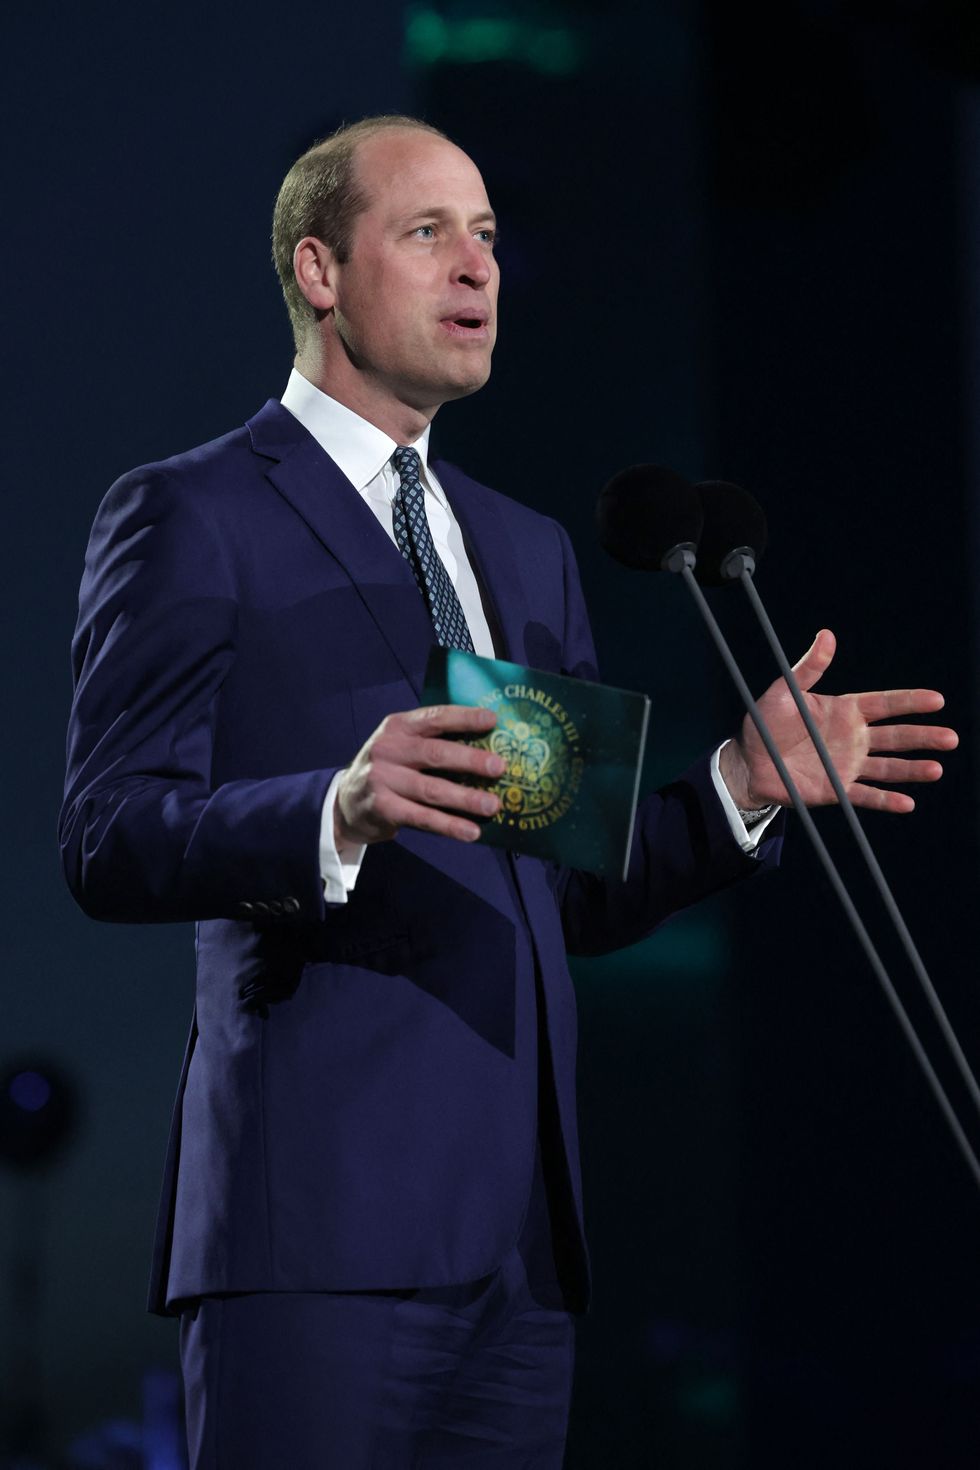 britains prince william, prince of wales speaks on stage inside windsor castle grounds at the coronation concert, in windsor, west of london on may 7, 2023 for the first time ever, the east terrace of windsor castle will host a spectacular live concert that will also be seen in over 100 countries around the world the event will be attended by 20,000 members of the public from across the uk photo by chris jackson pool afp photo by chris jacksonpoolafp via getty images